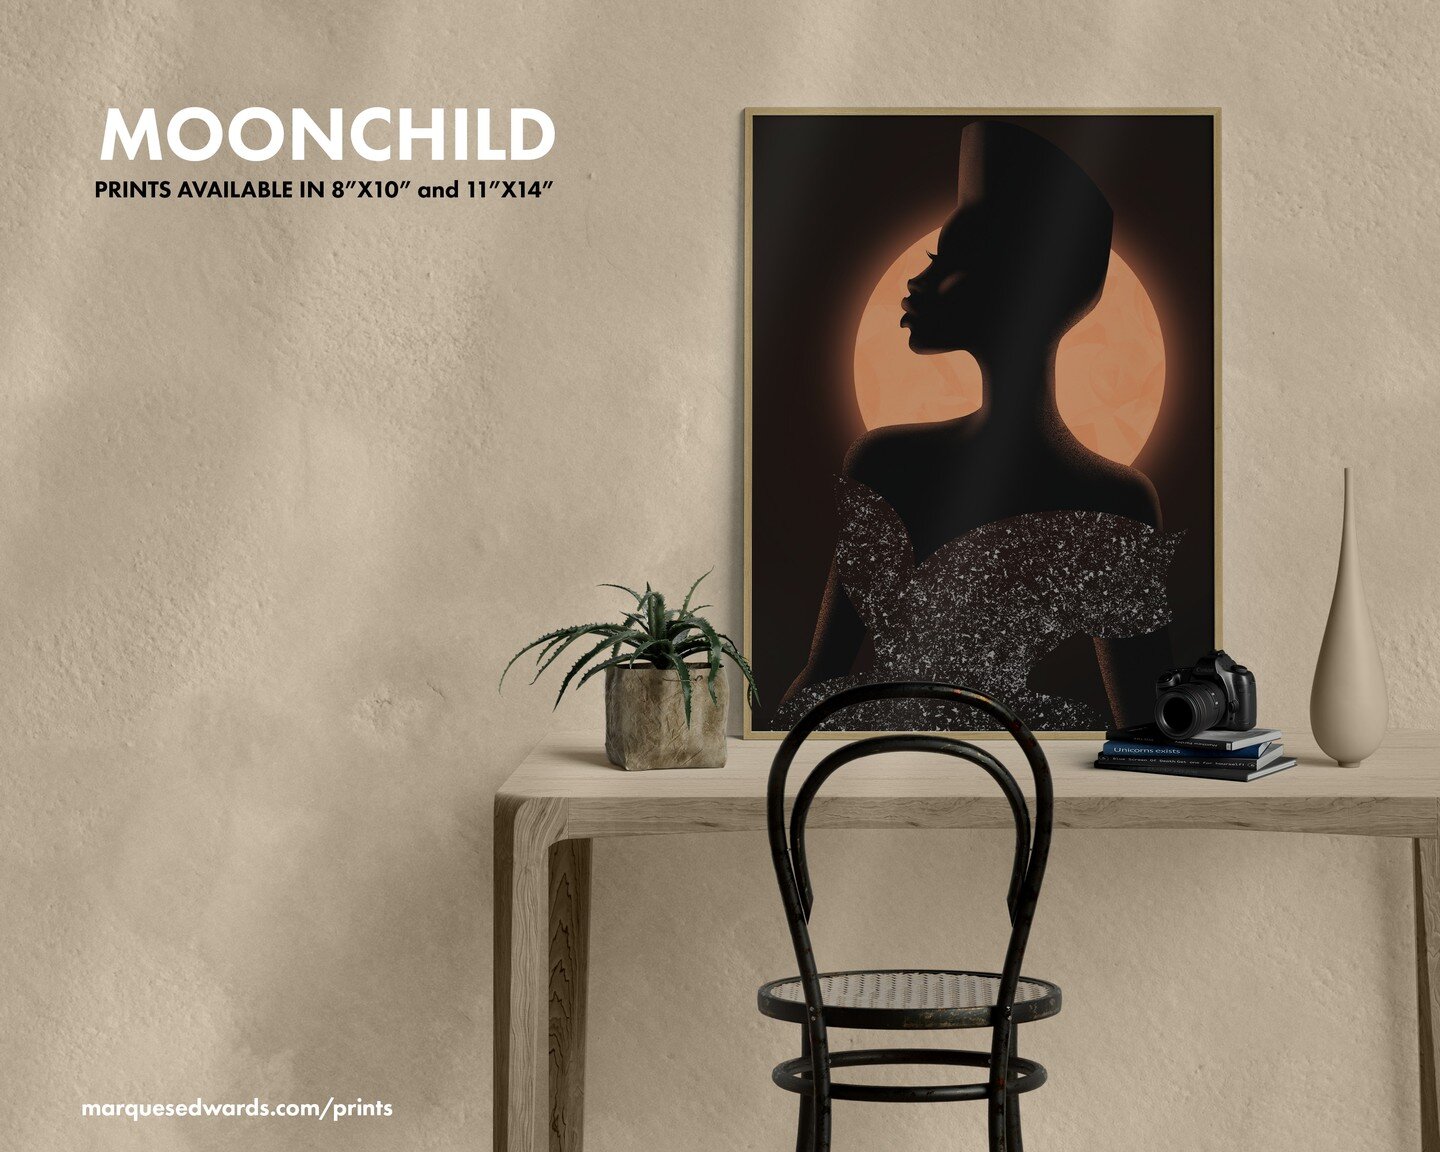 Moonchild prints are available on my site. 

All prints on my site 8x10&quot; and 11&quot;x14&quot; are printed in-house and are dated, numbered, and signed. Only a quantity of 20 signed, numbered, and dated will be produced of each of the two sizes 